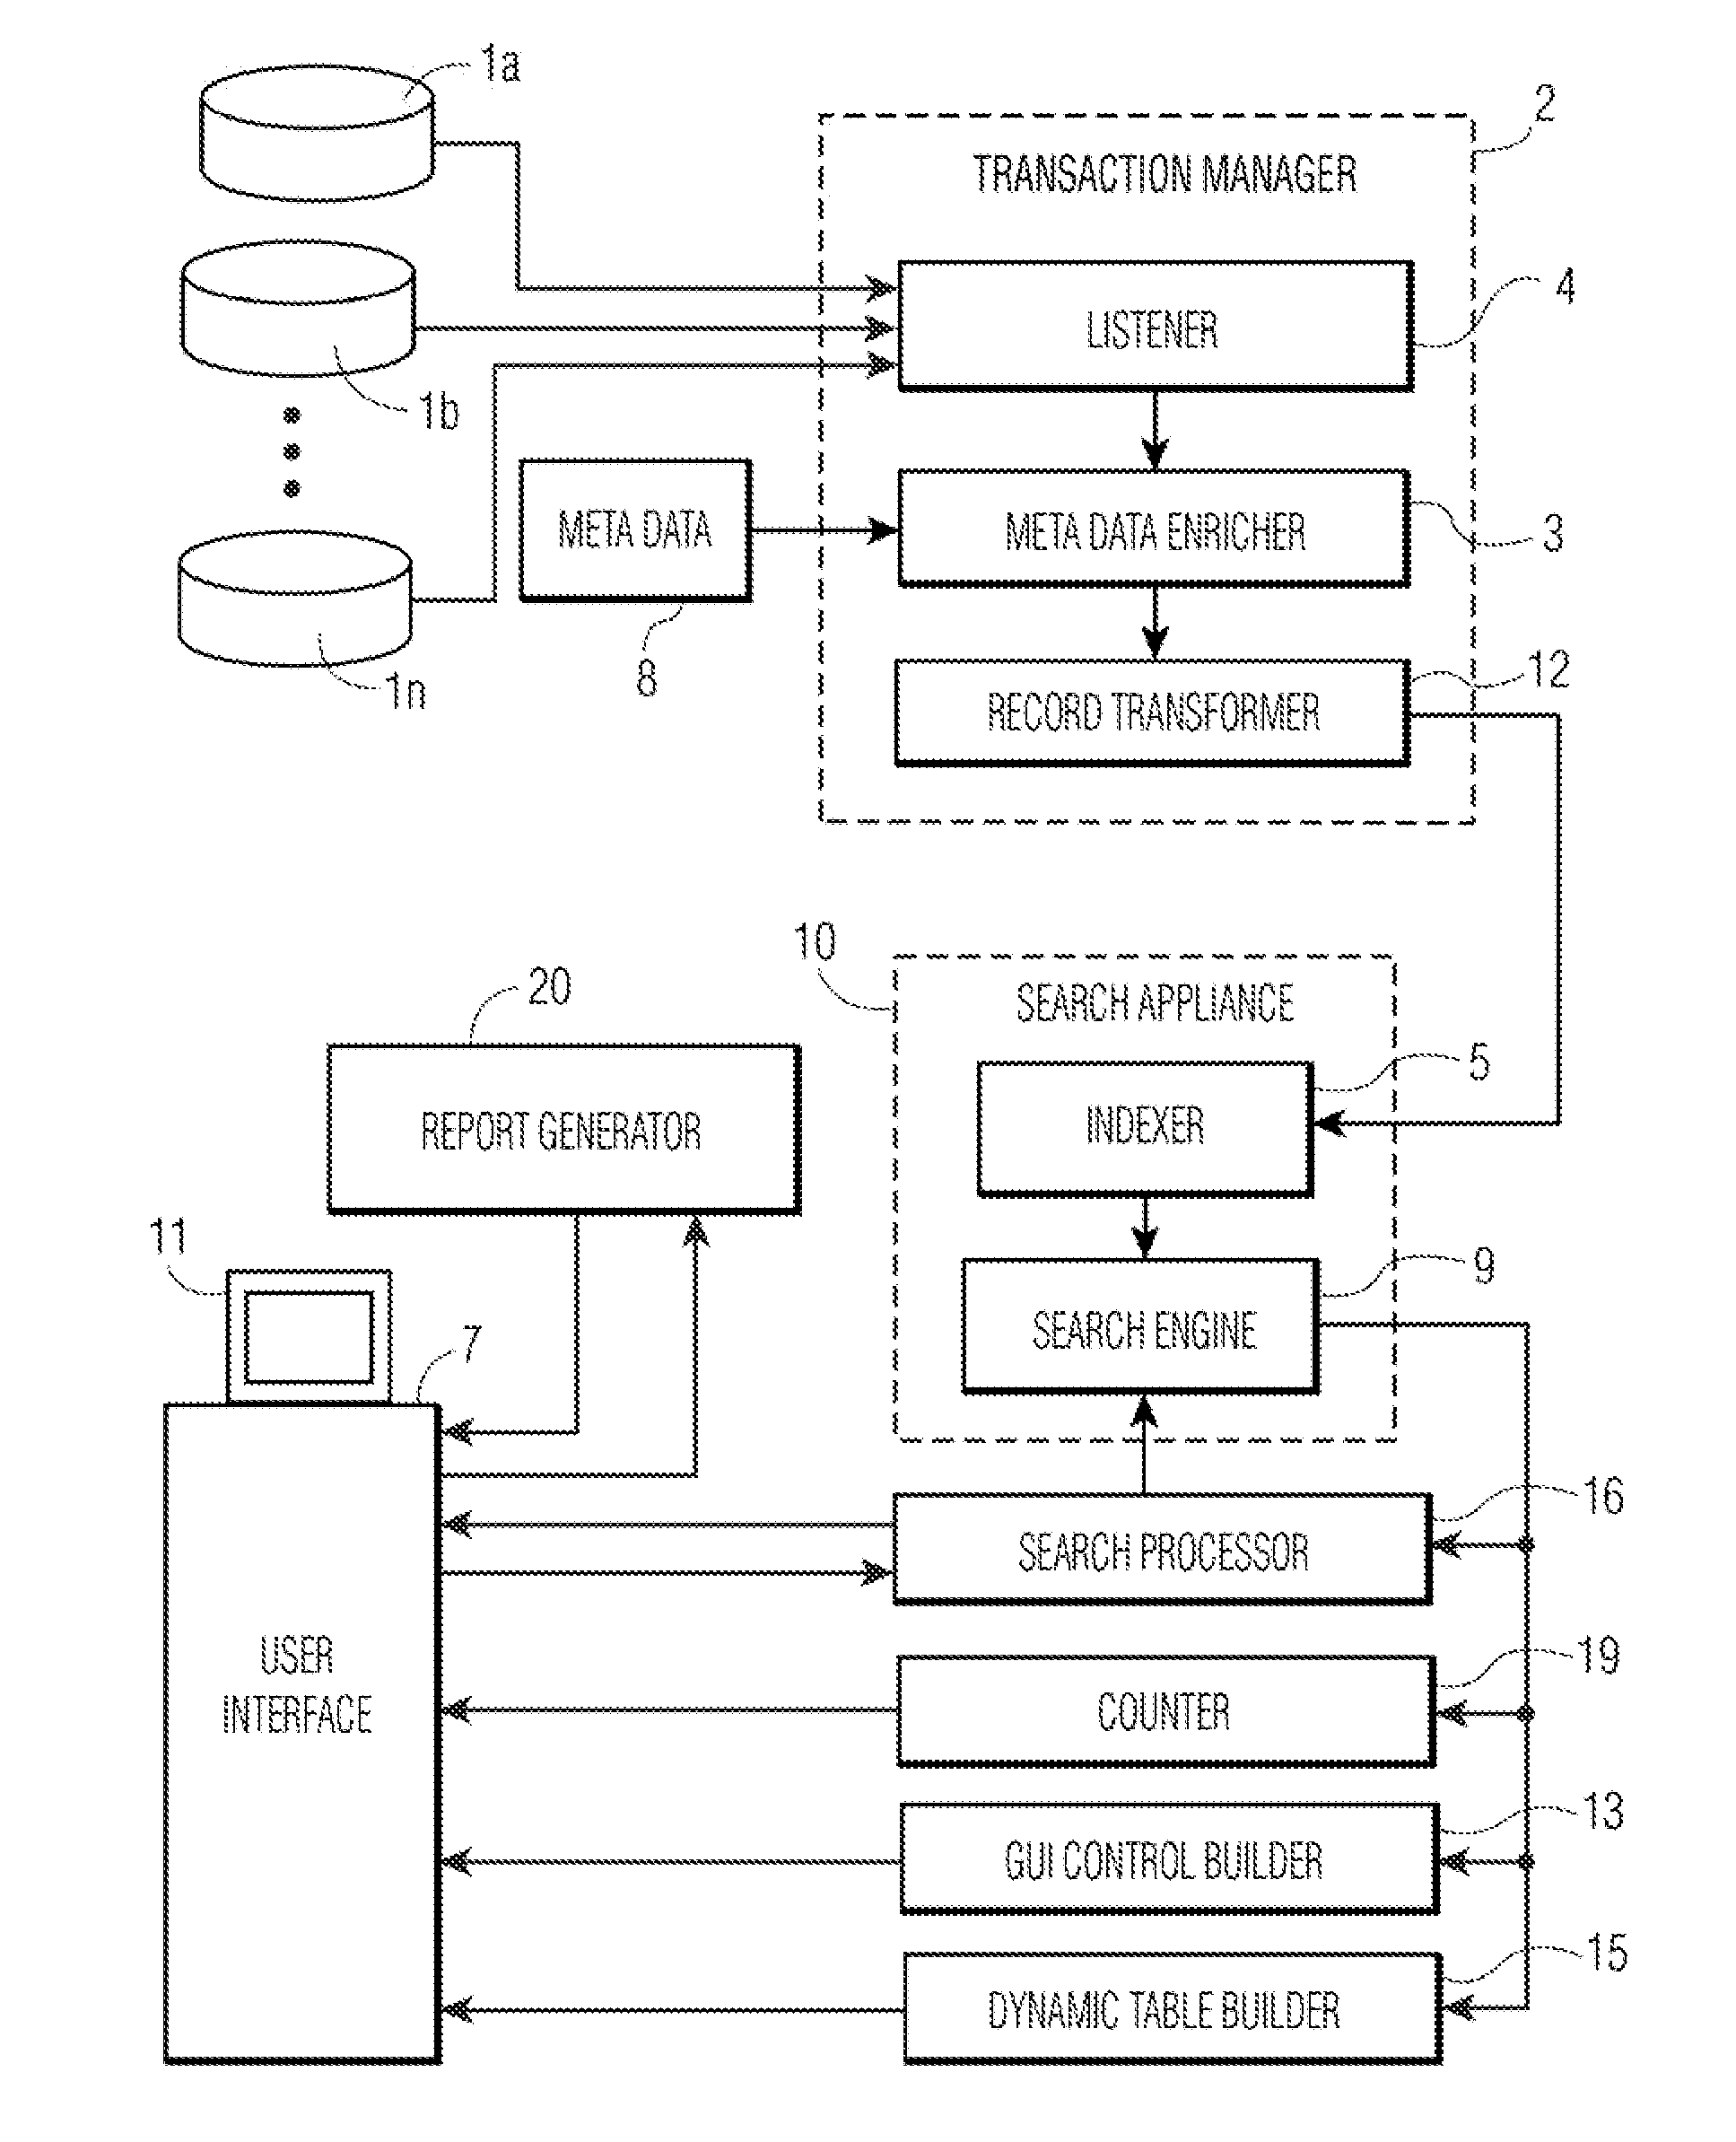 Apparatus and Method for Conducting Searches with a Search Engine for Unstructured Data to Retrieve Records Enriched with Structured Data and Generate Reports Based Thereon